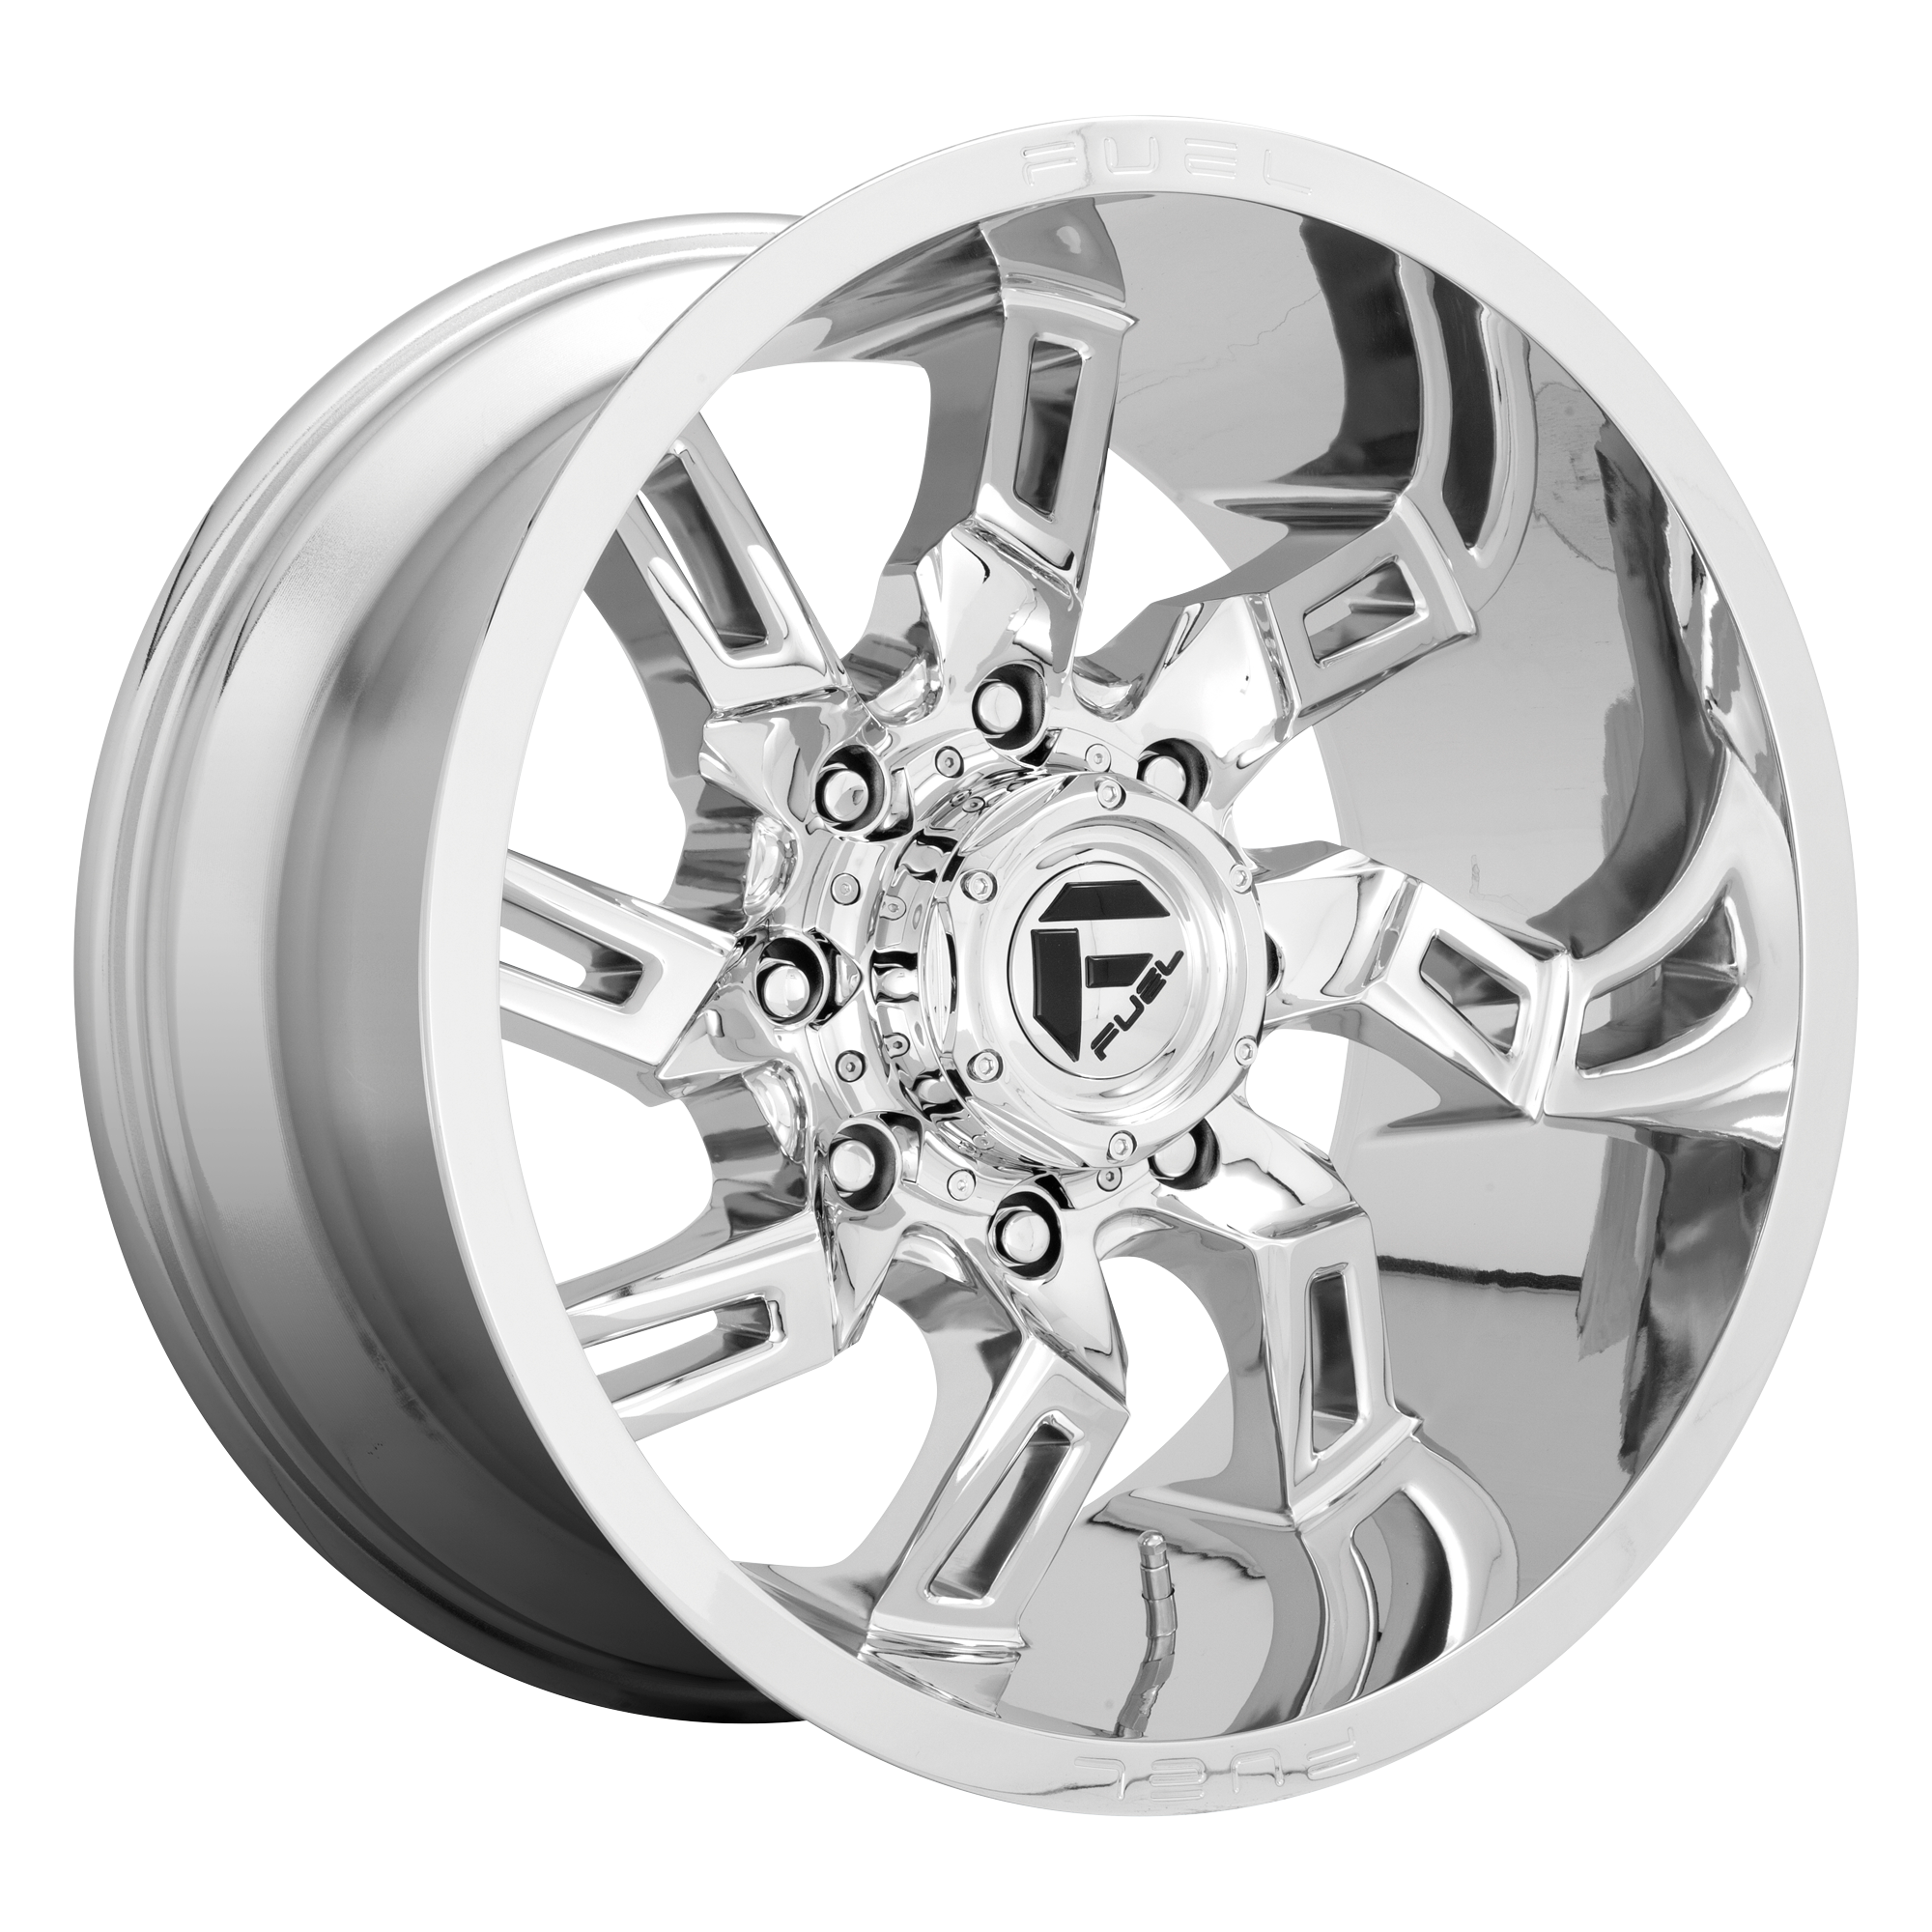 LOCKDOWN 20x9 8x165.10 CHROME (1 mm) - Tires and Engine Performance